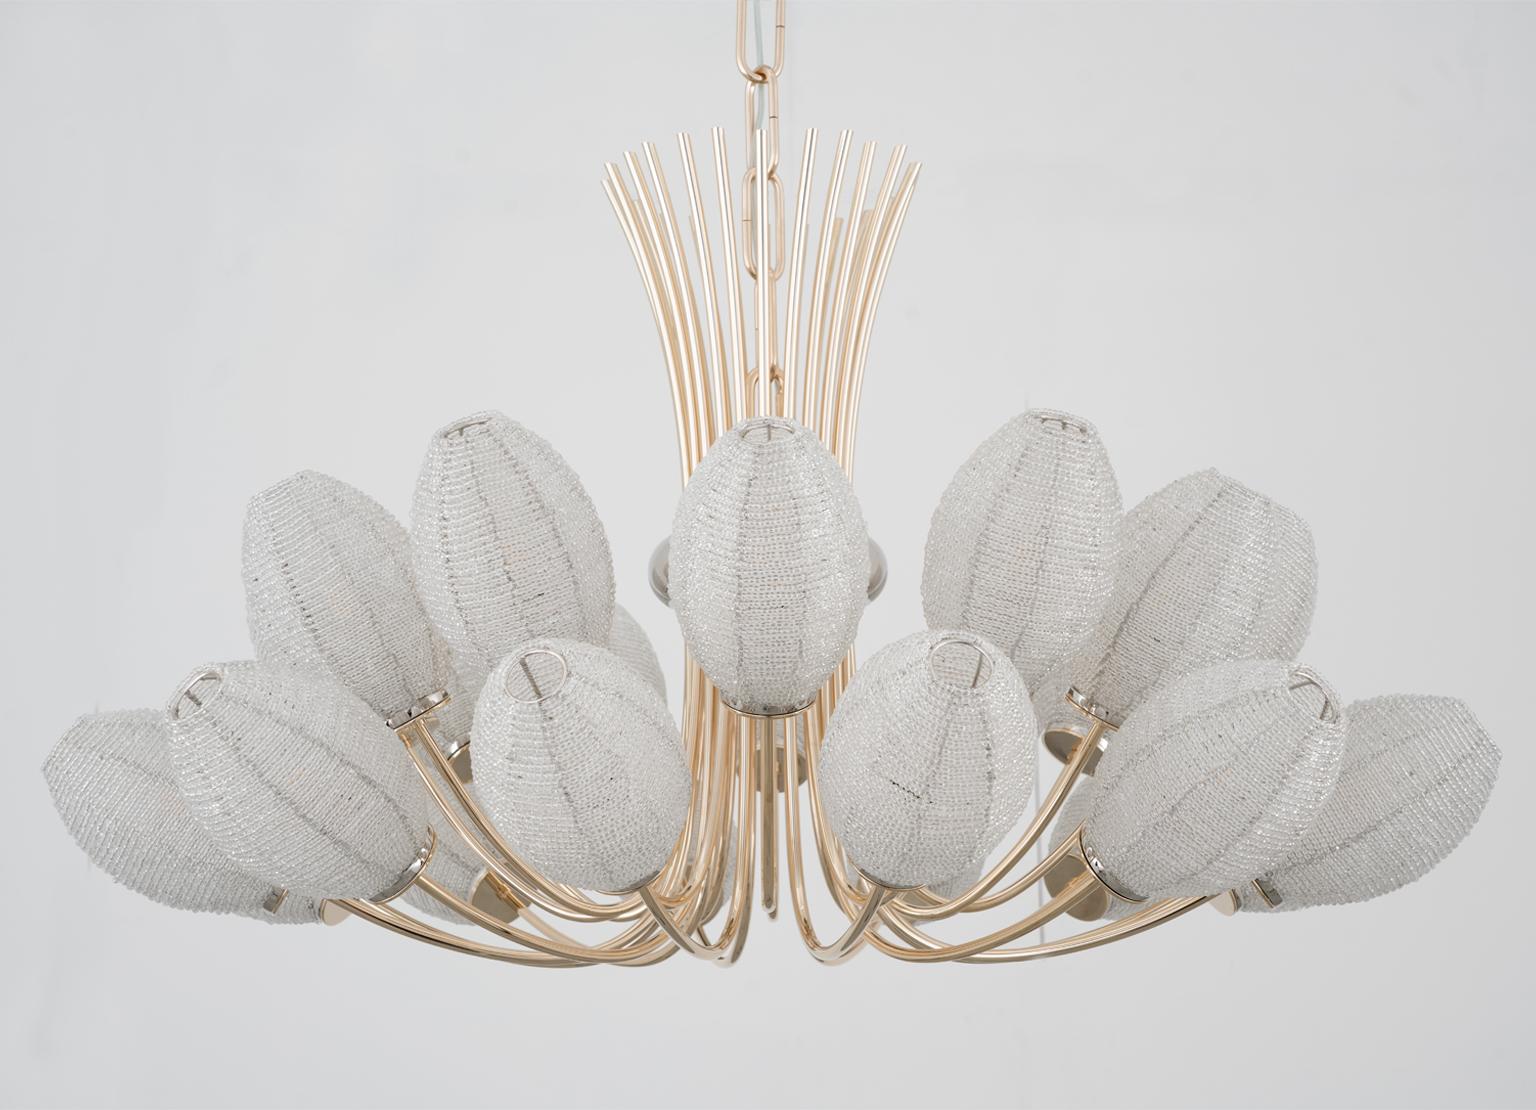 Three thousand six hundred twenty eight pearls, one strand. Candid lampshades that remind of precious buds whose design combines the delicacy and the strength of a full bloom together, stopping time a moment before it took place. A way to preserve